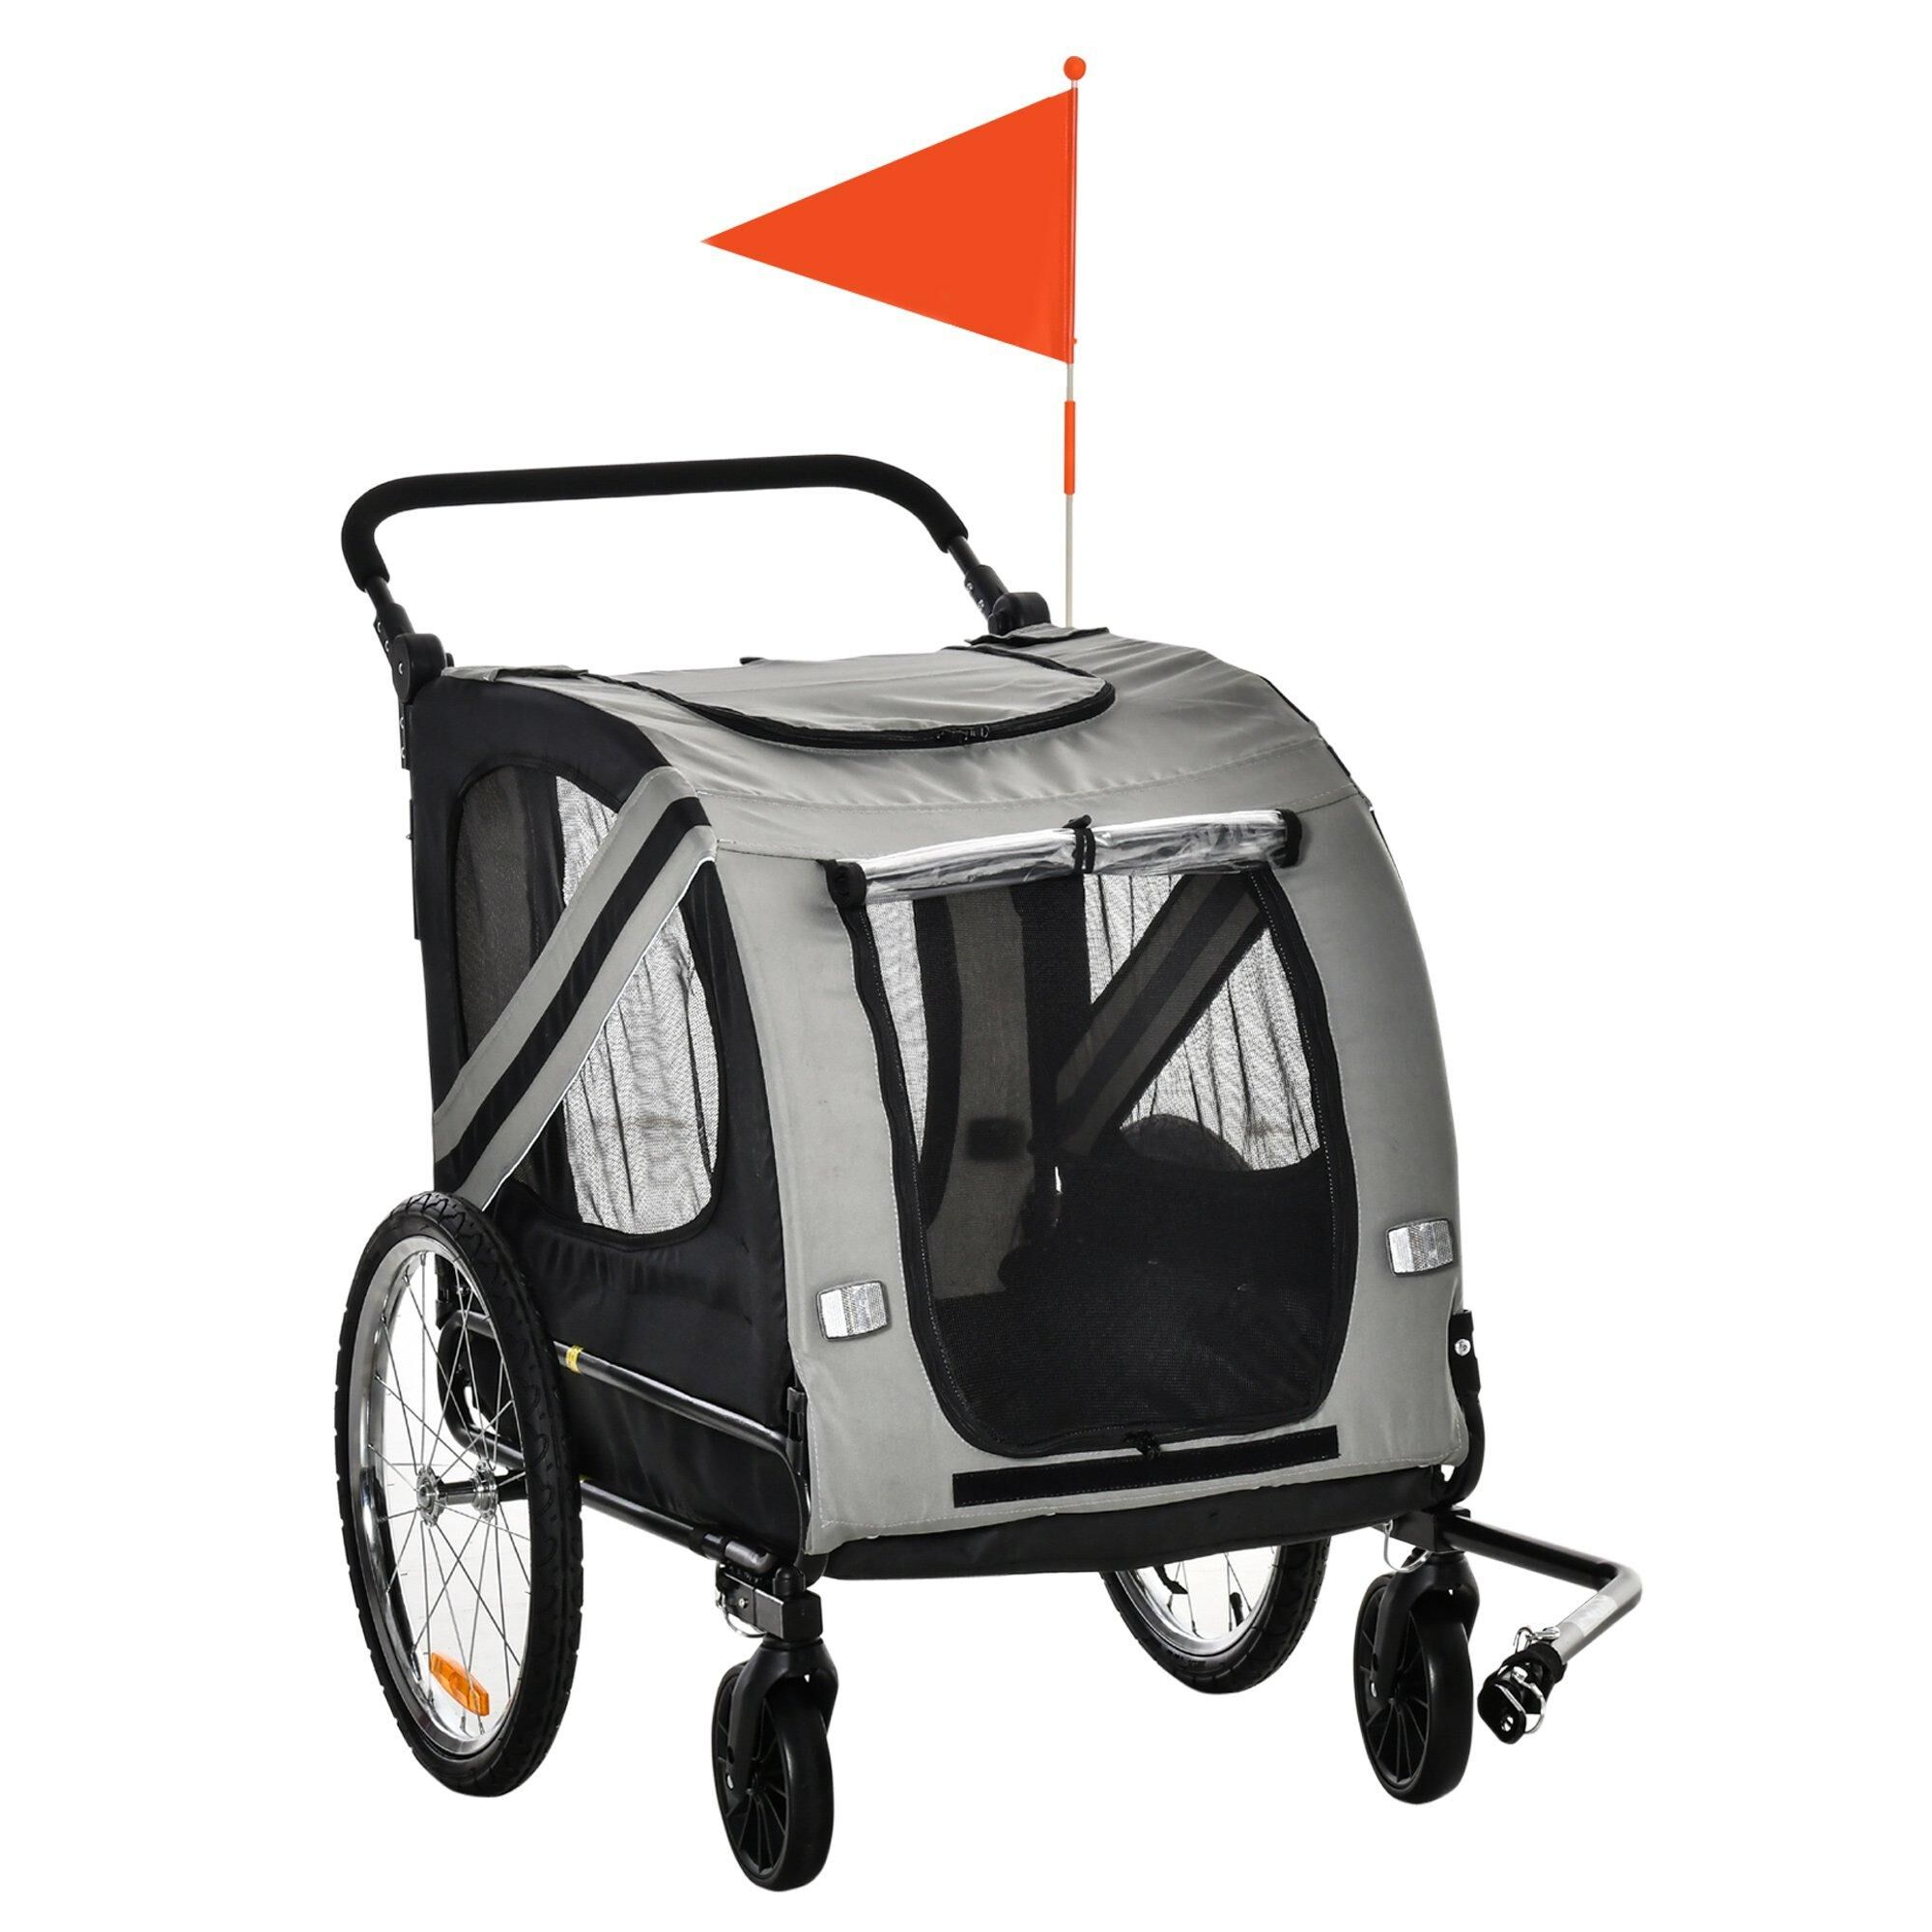 PawHut Dog Bike Trailer 2-in-1 Pet Stroller Cart Bicycle Carrier Attachment for Travel in steel frame with Wheels Hitch Coupler Reflectors Flag